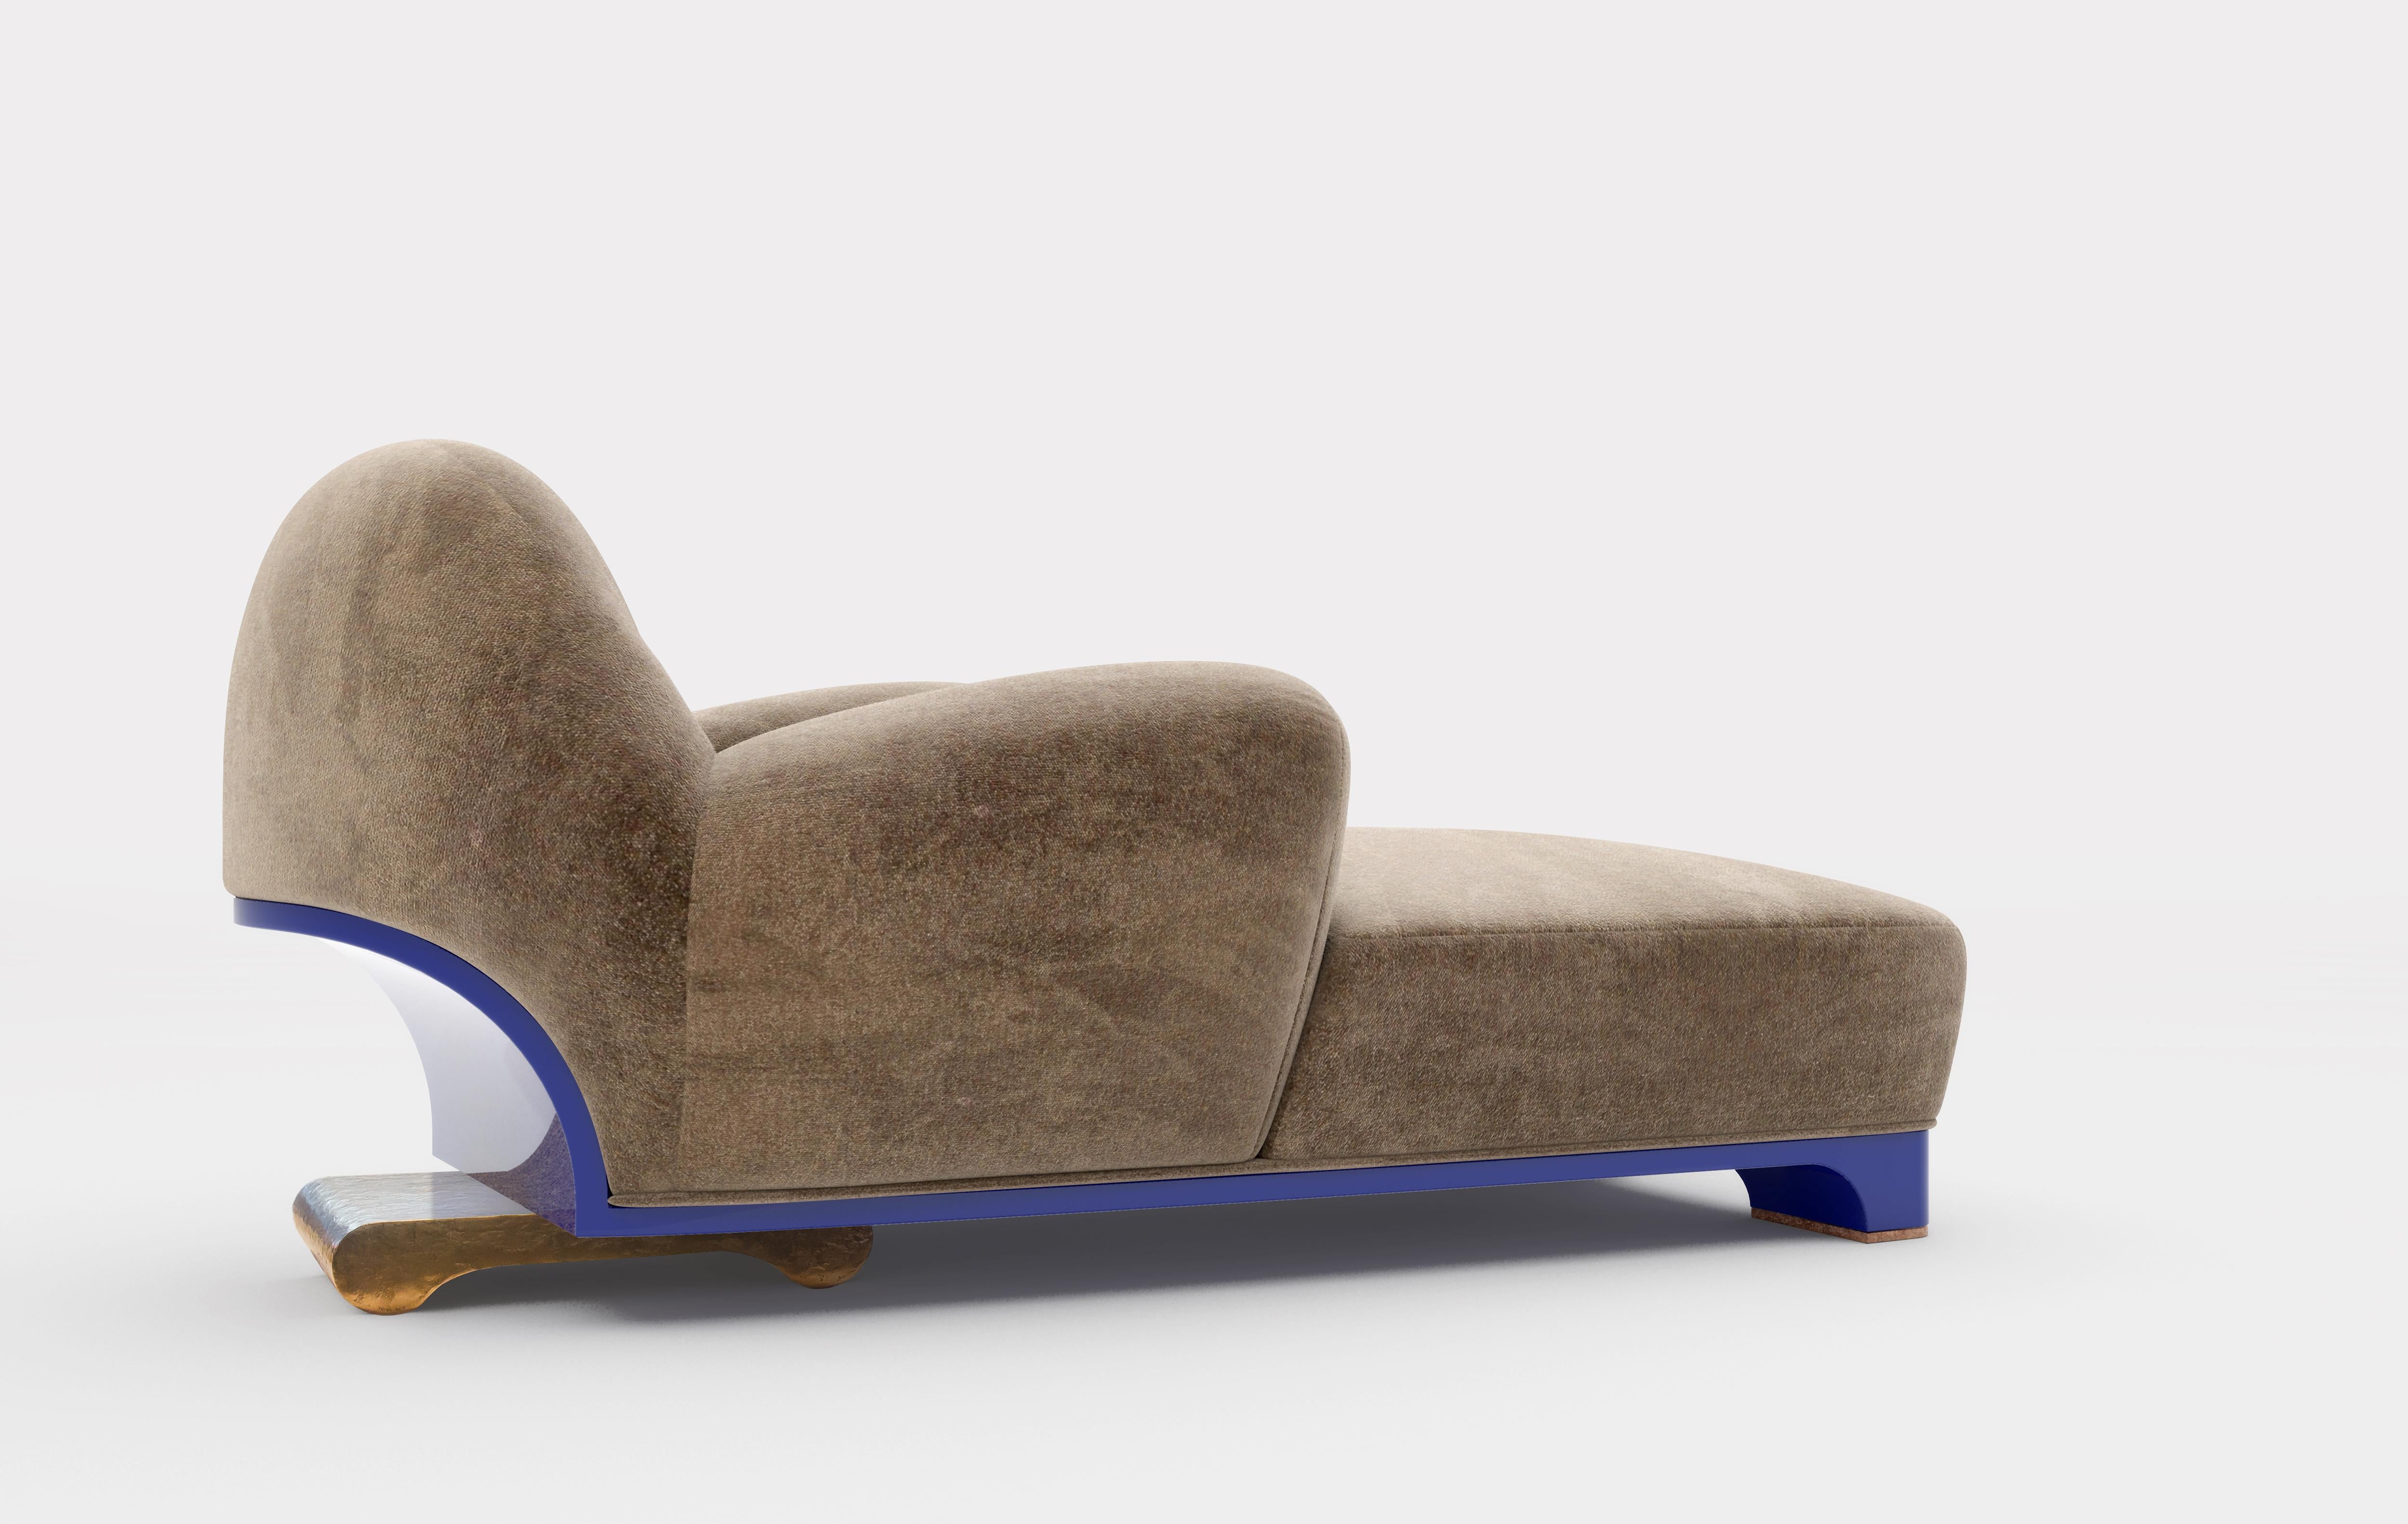 Achille Salvagni
Tato chaise lounge
2017
Upholstered chaise lounge in tufted velvet with blue lacquered wooden structure and cast bronze details. Constructed to offer an incredibly comfortable, luxurious, and elegant place to rest; perfectly